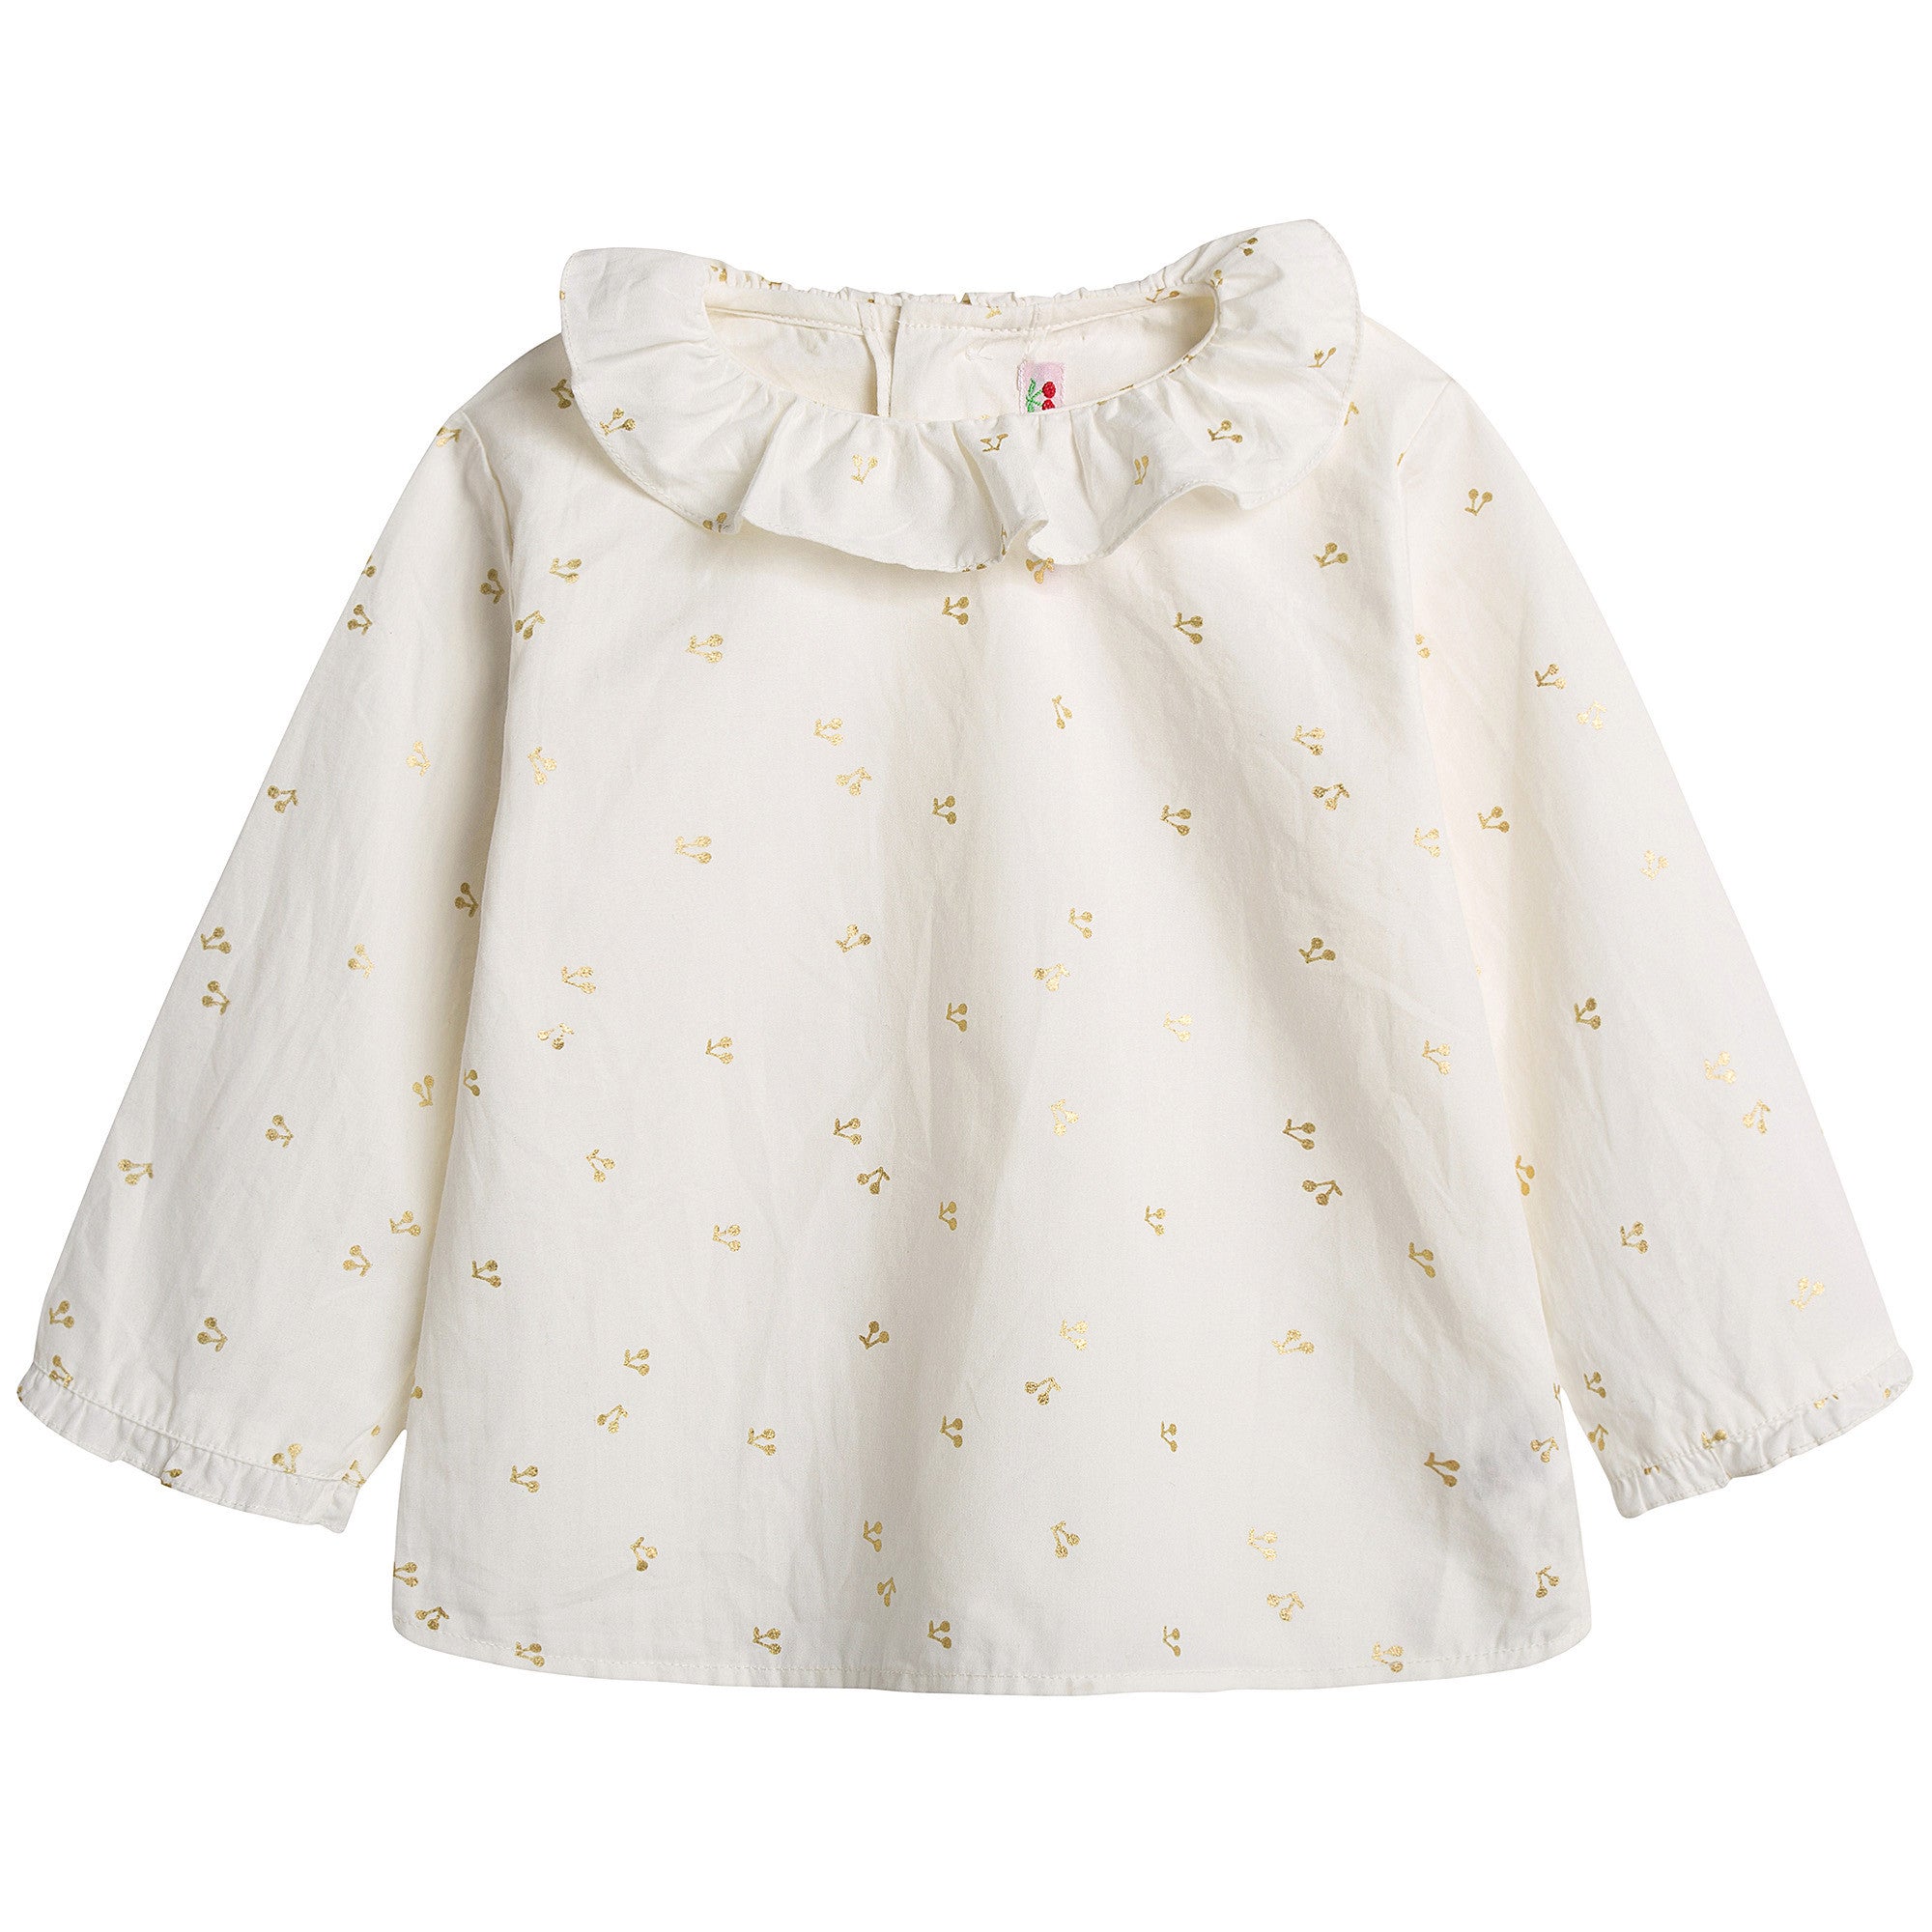 Baby Girls White With Gold Cherry Blouse - CÉMAROSE | Children's Fashion Store - 1